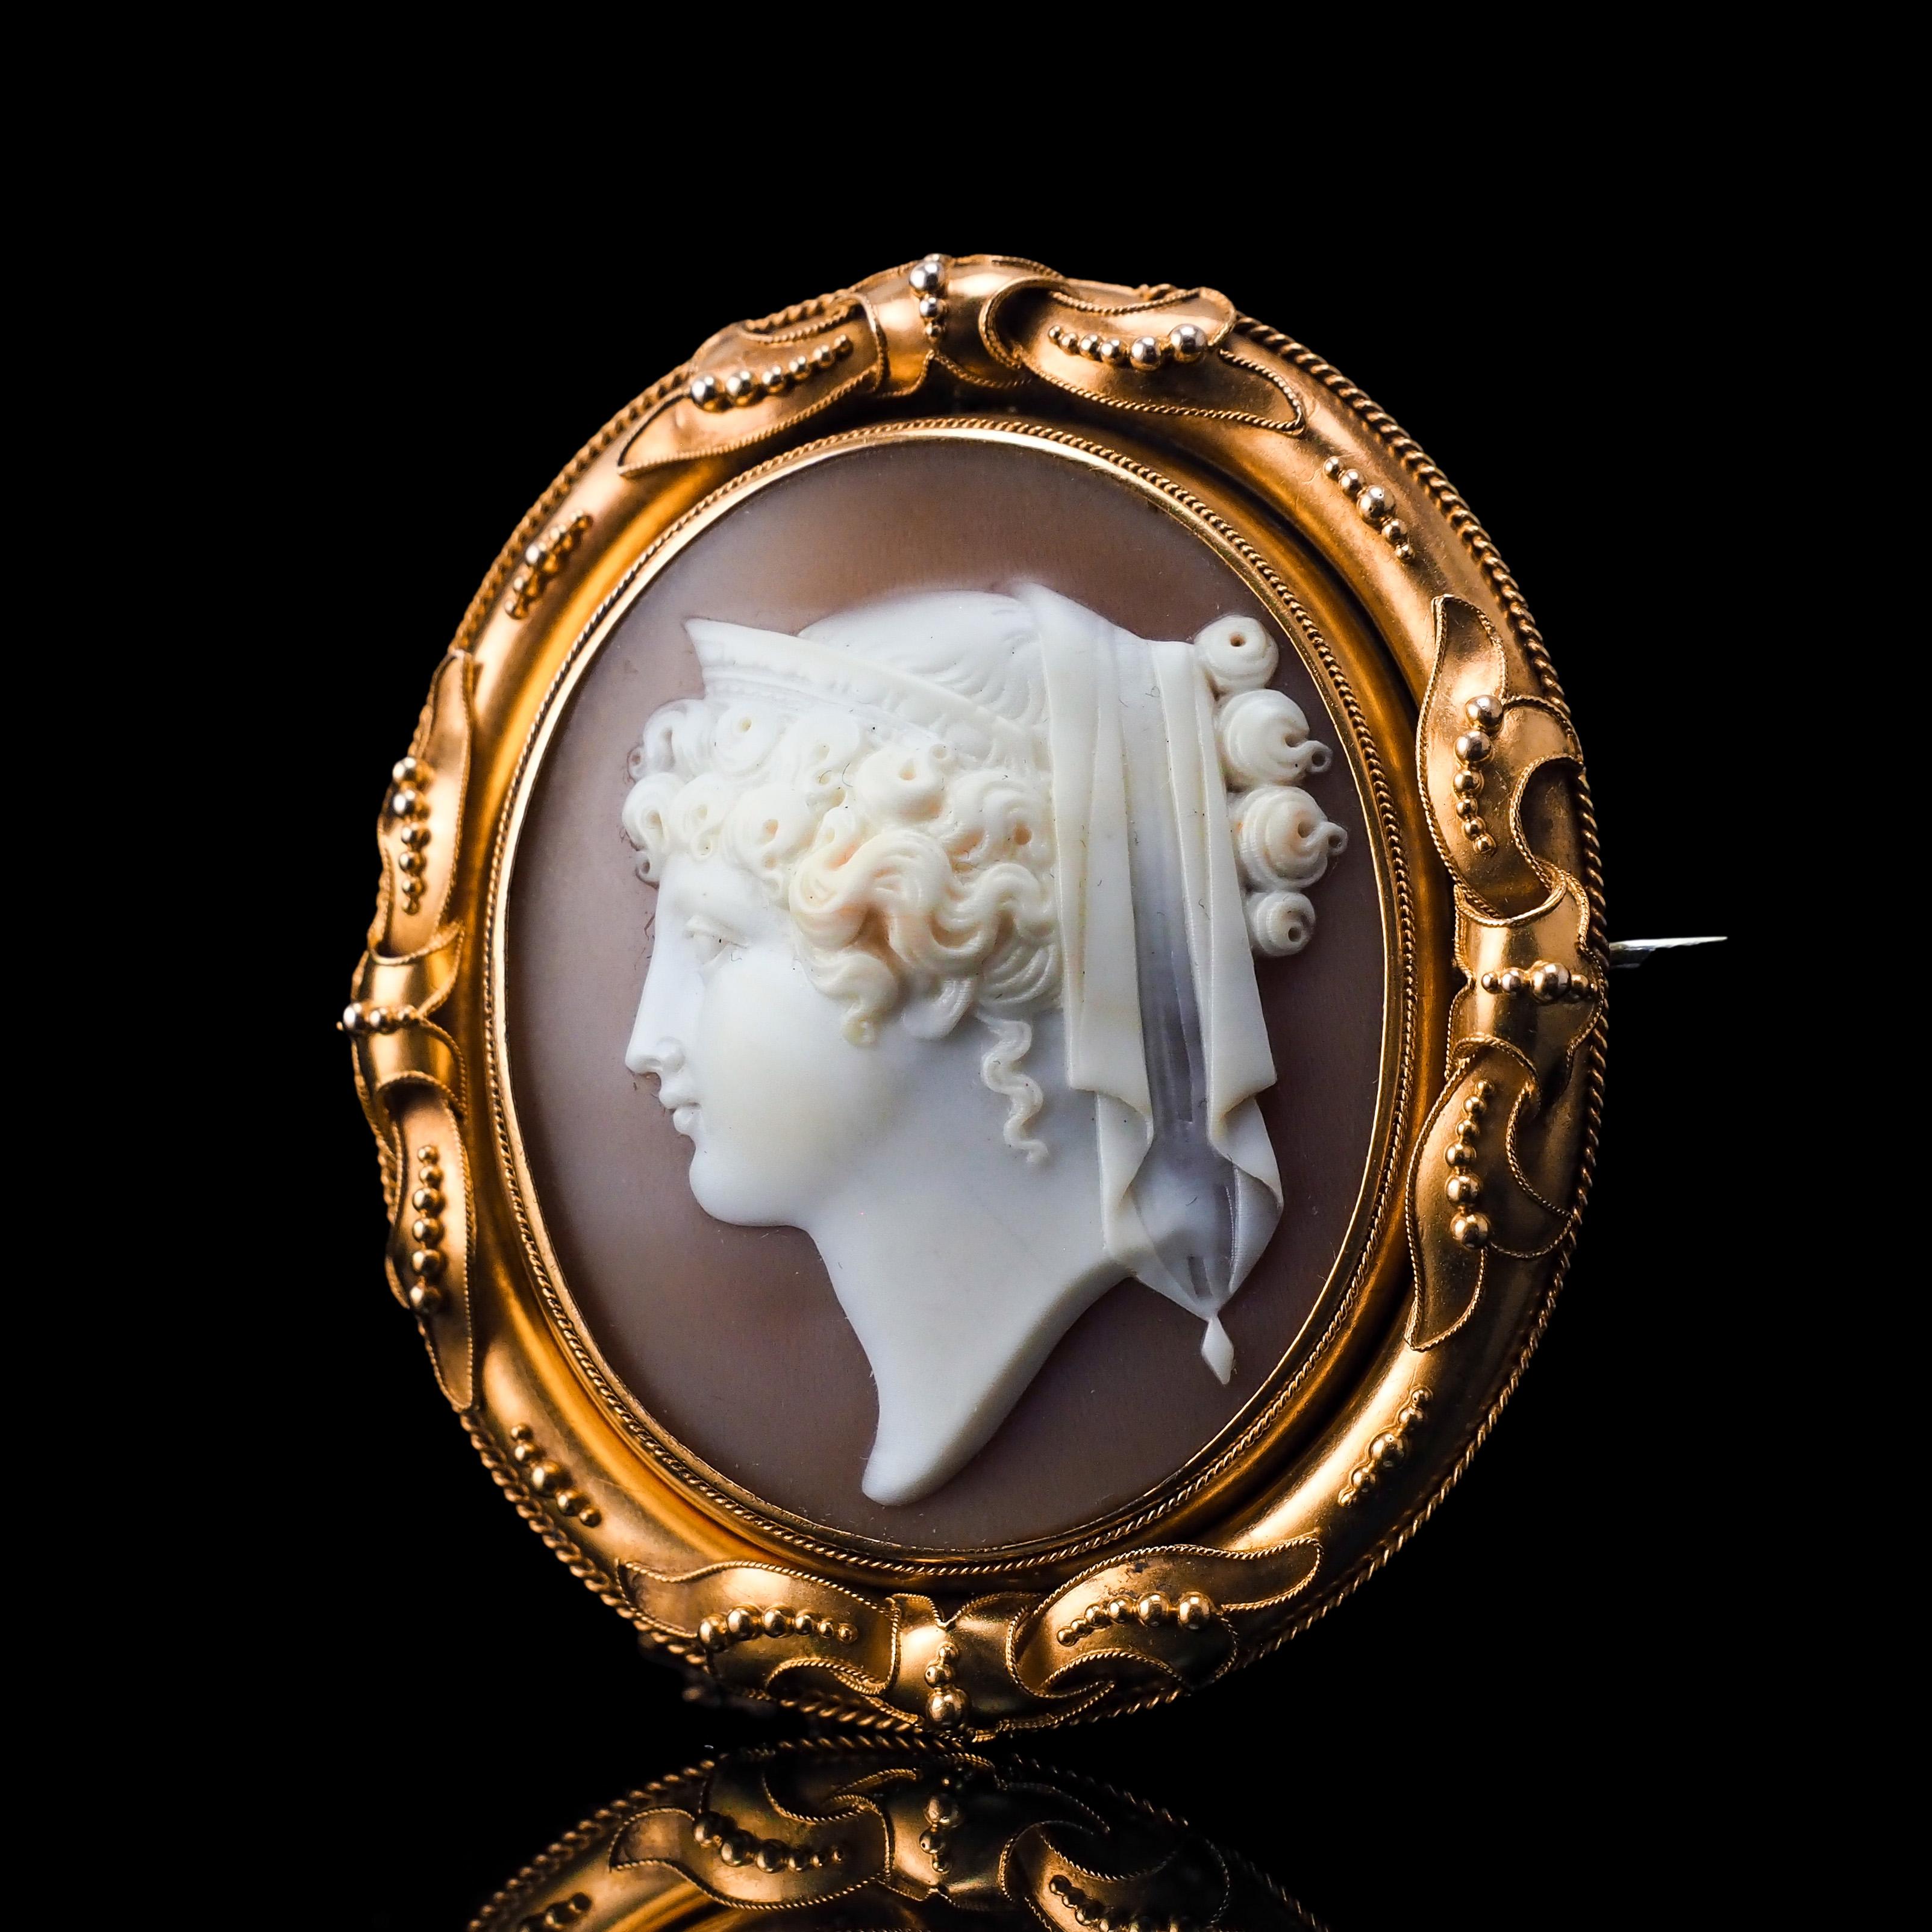 Antique Cameo Brooch Pendant Necklace 18K Gold - Victorian c.1860 For Sale 10